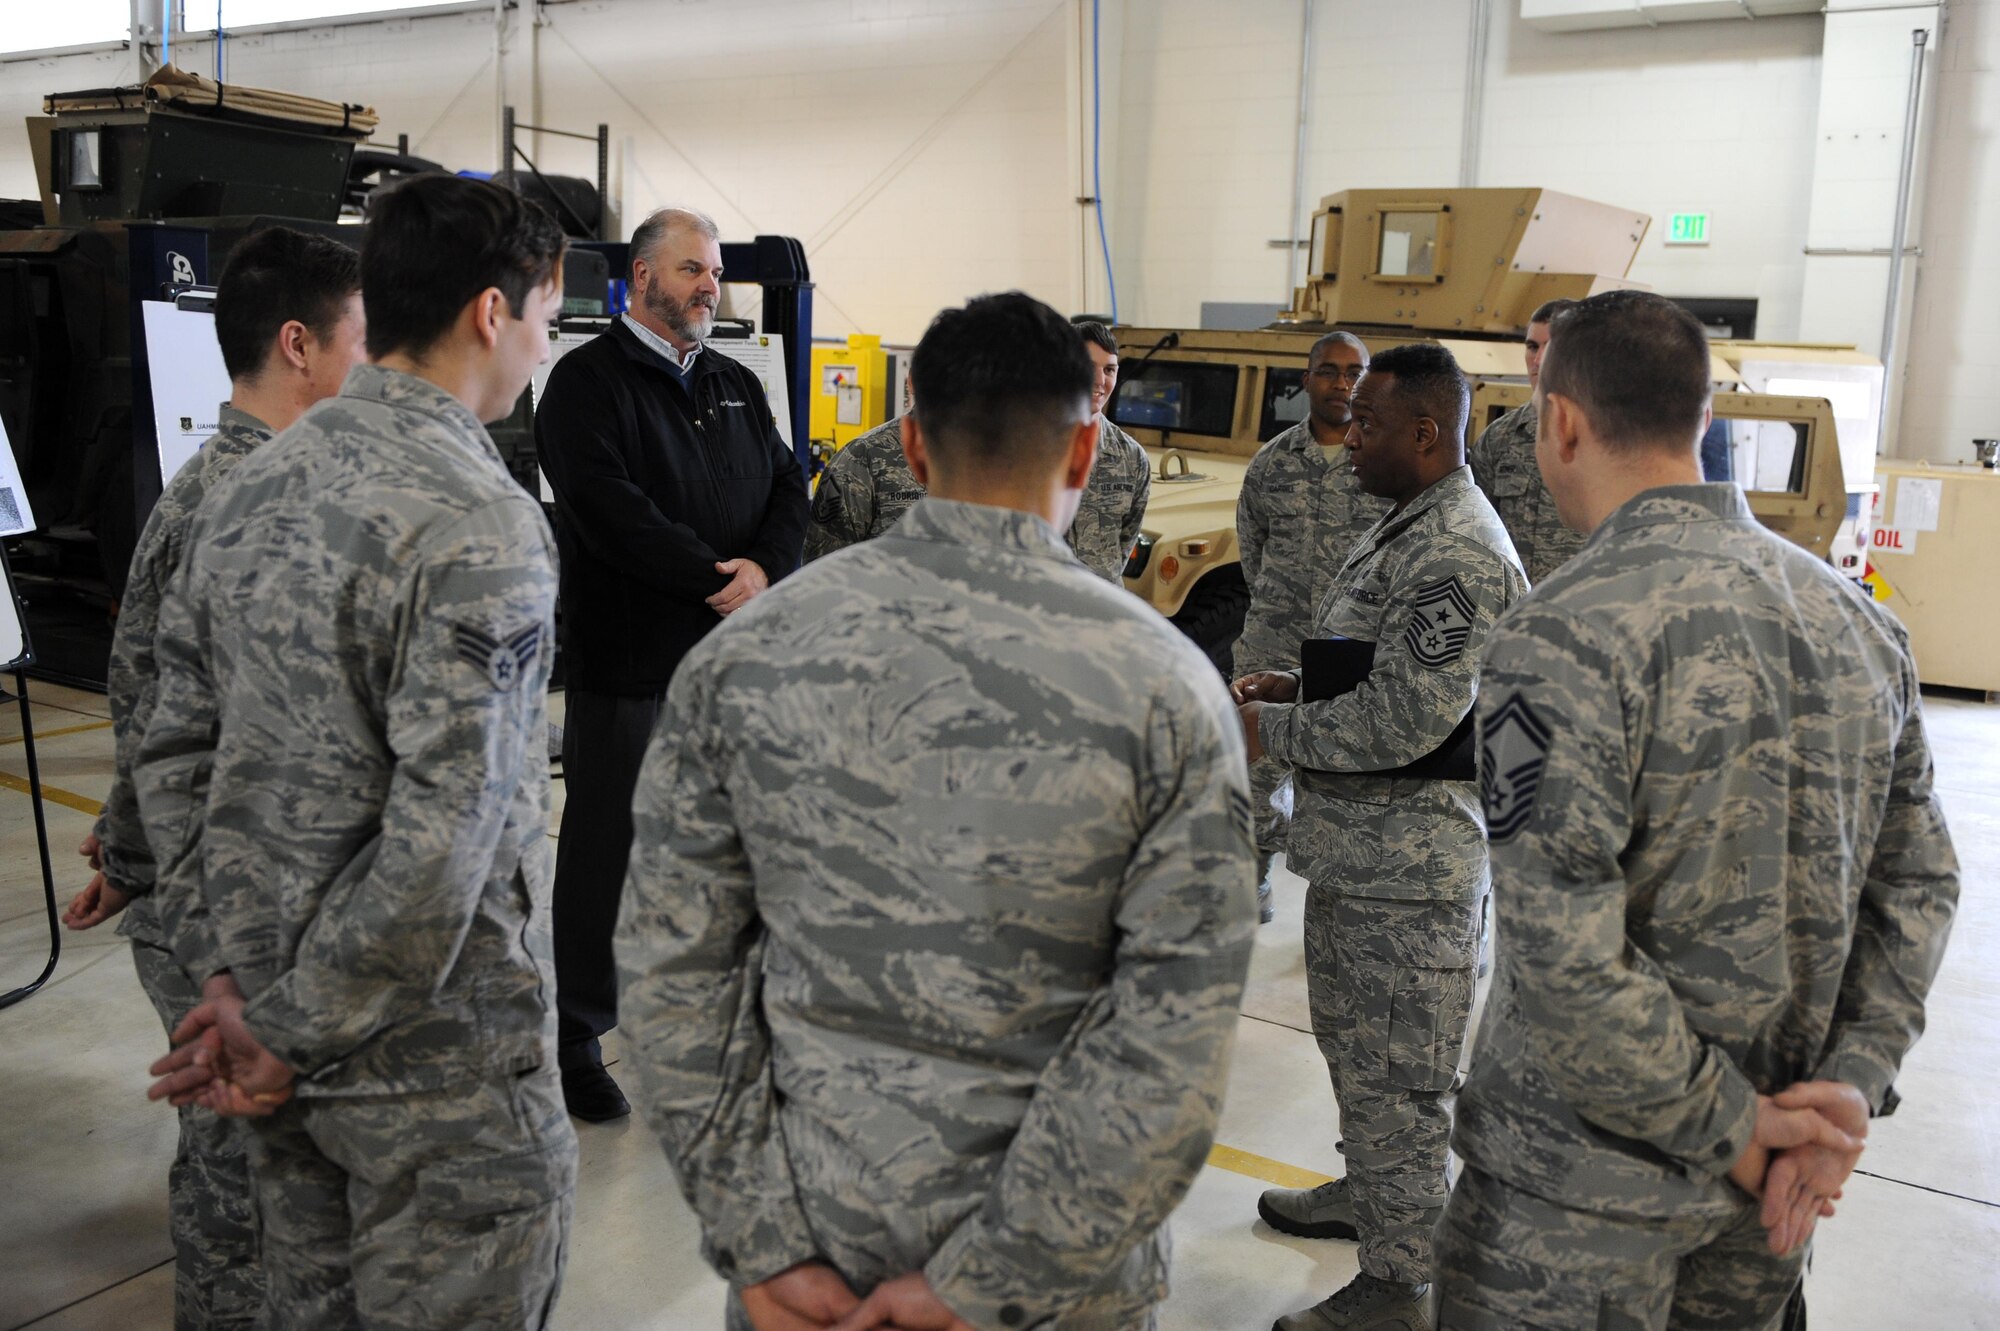 Chief Master Sgt. Calvin Williams, Air Force Global Strike command chief, speaks with Airmen from the 5th Logistics Readiness Squadron at Minot Air Force Base, N.D., March 9, 2017. Williams toured several facilities during his visit. (U.S. Air Force photo/Senior Airman Kristoffer Kaubisch)